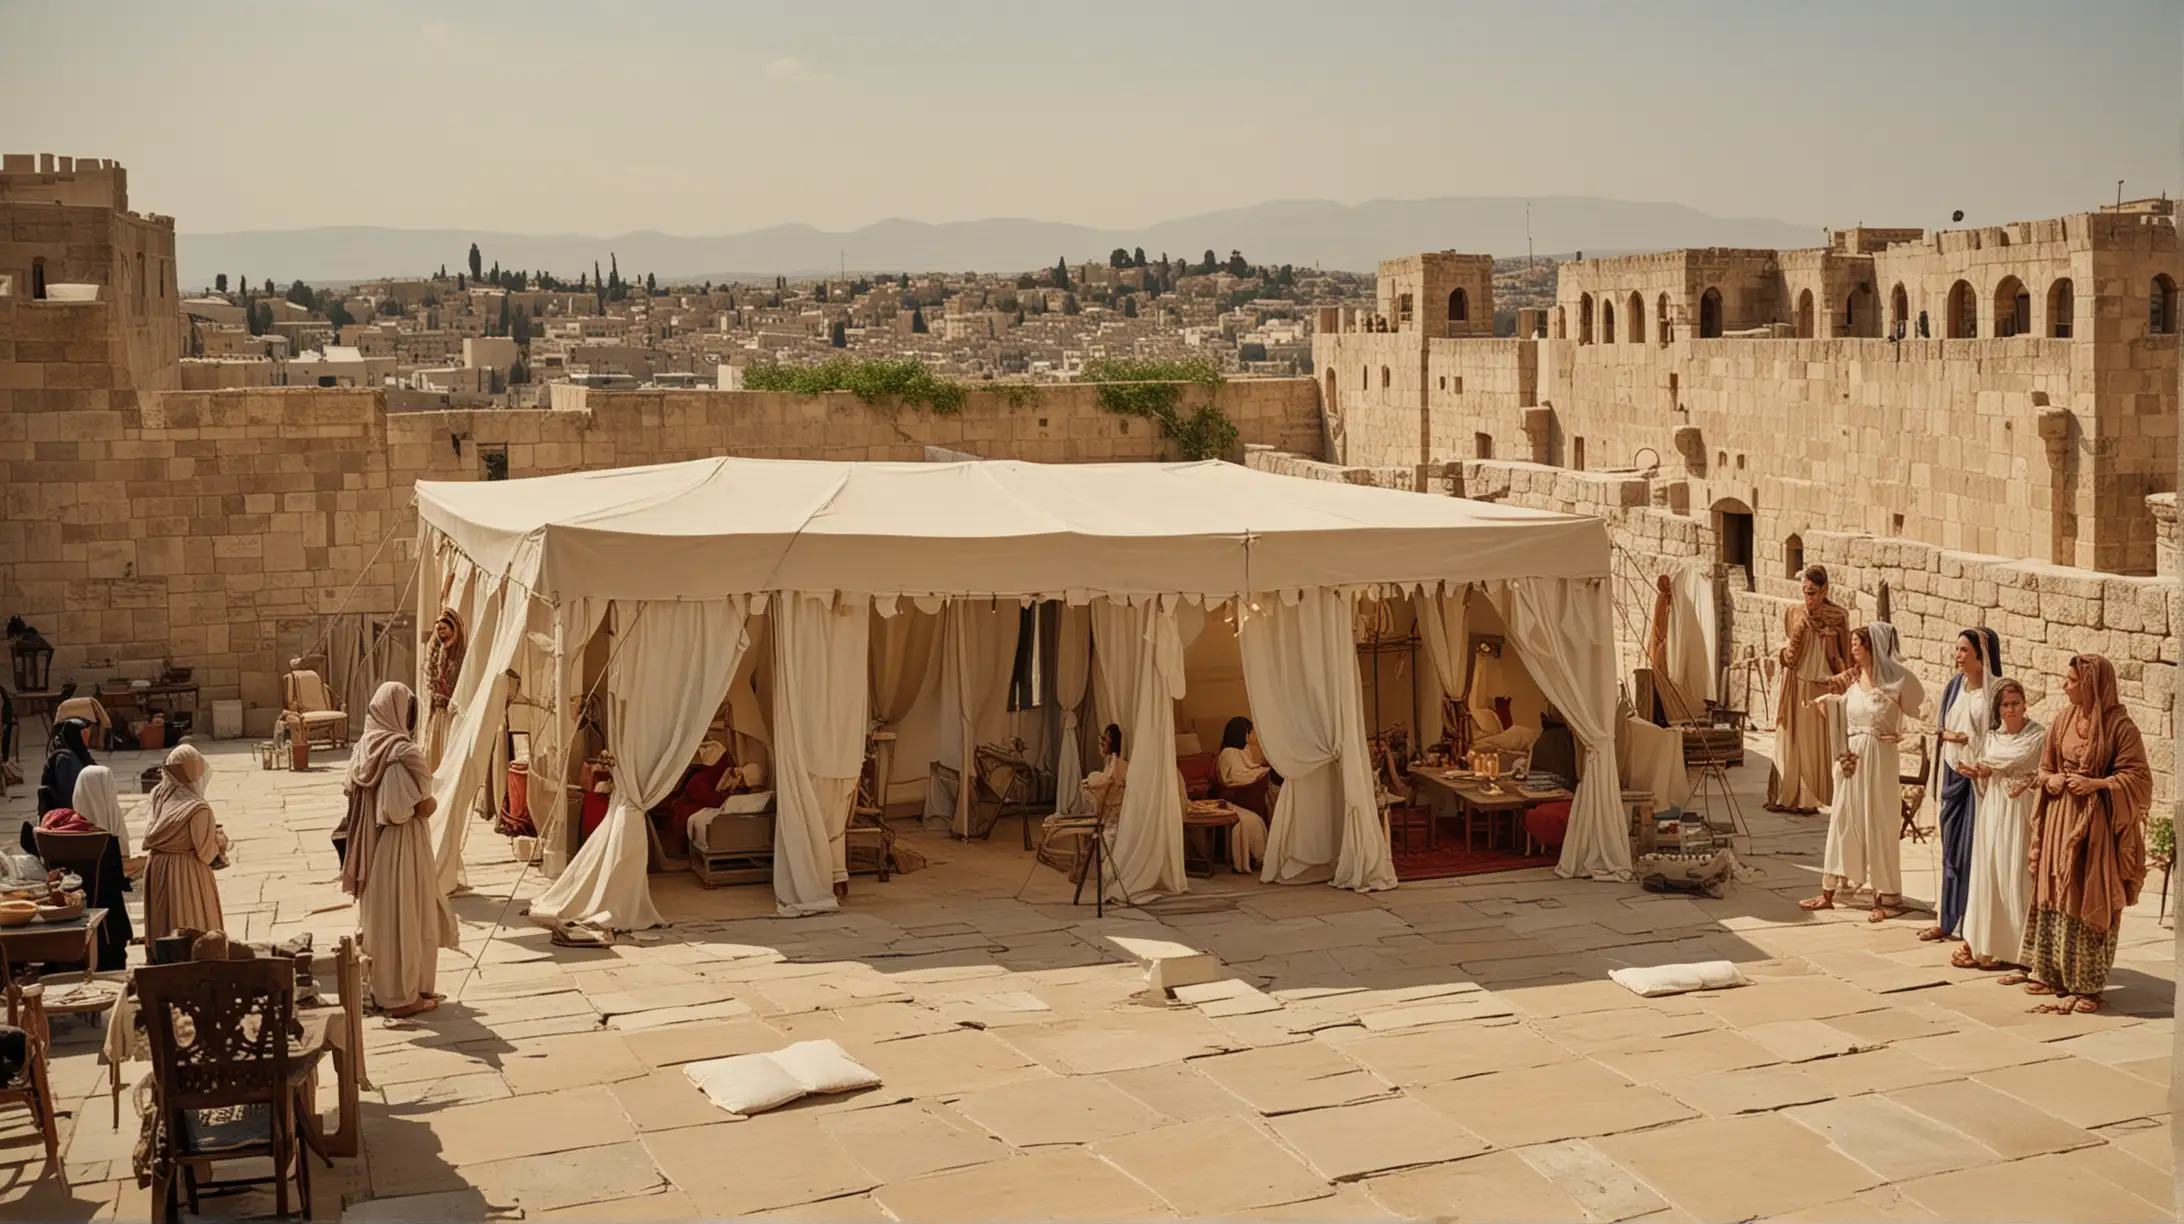 Biblical Era Roof Terrace Canopy with Women in Background